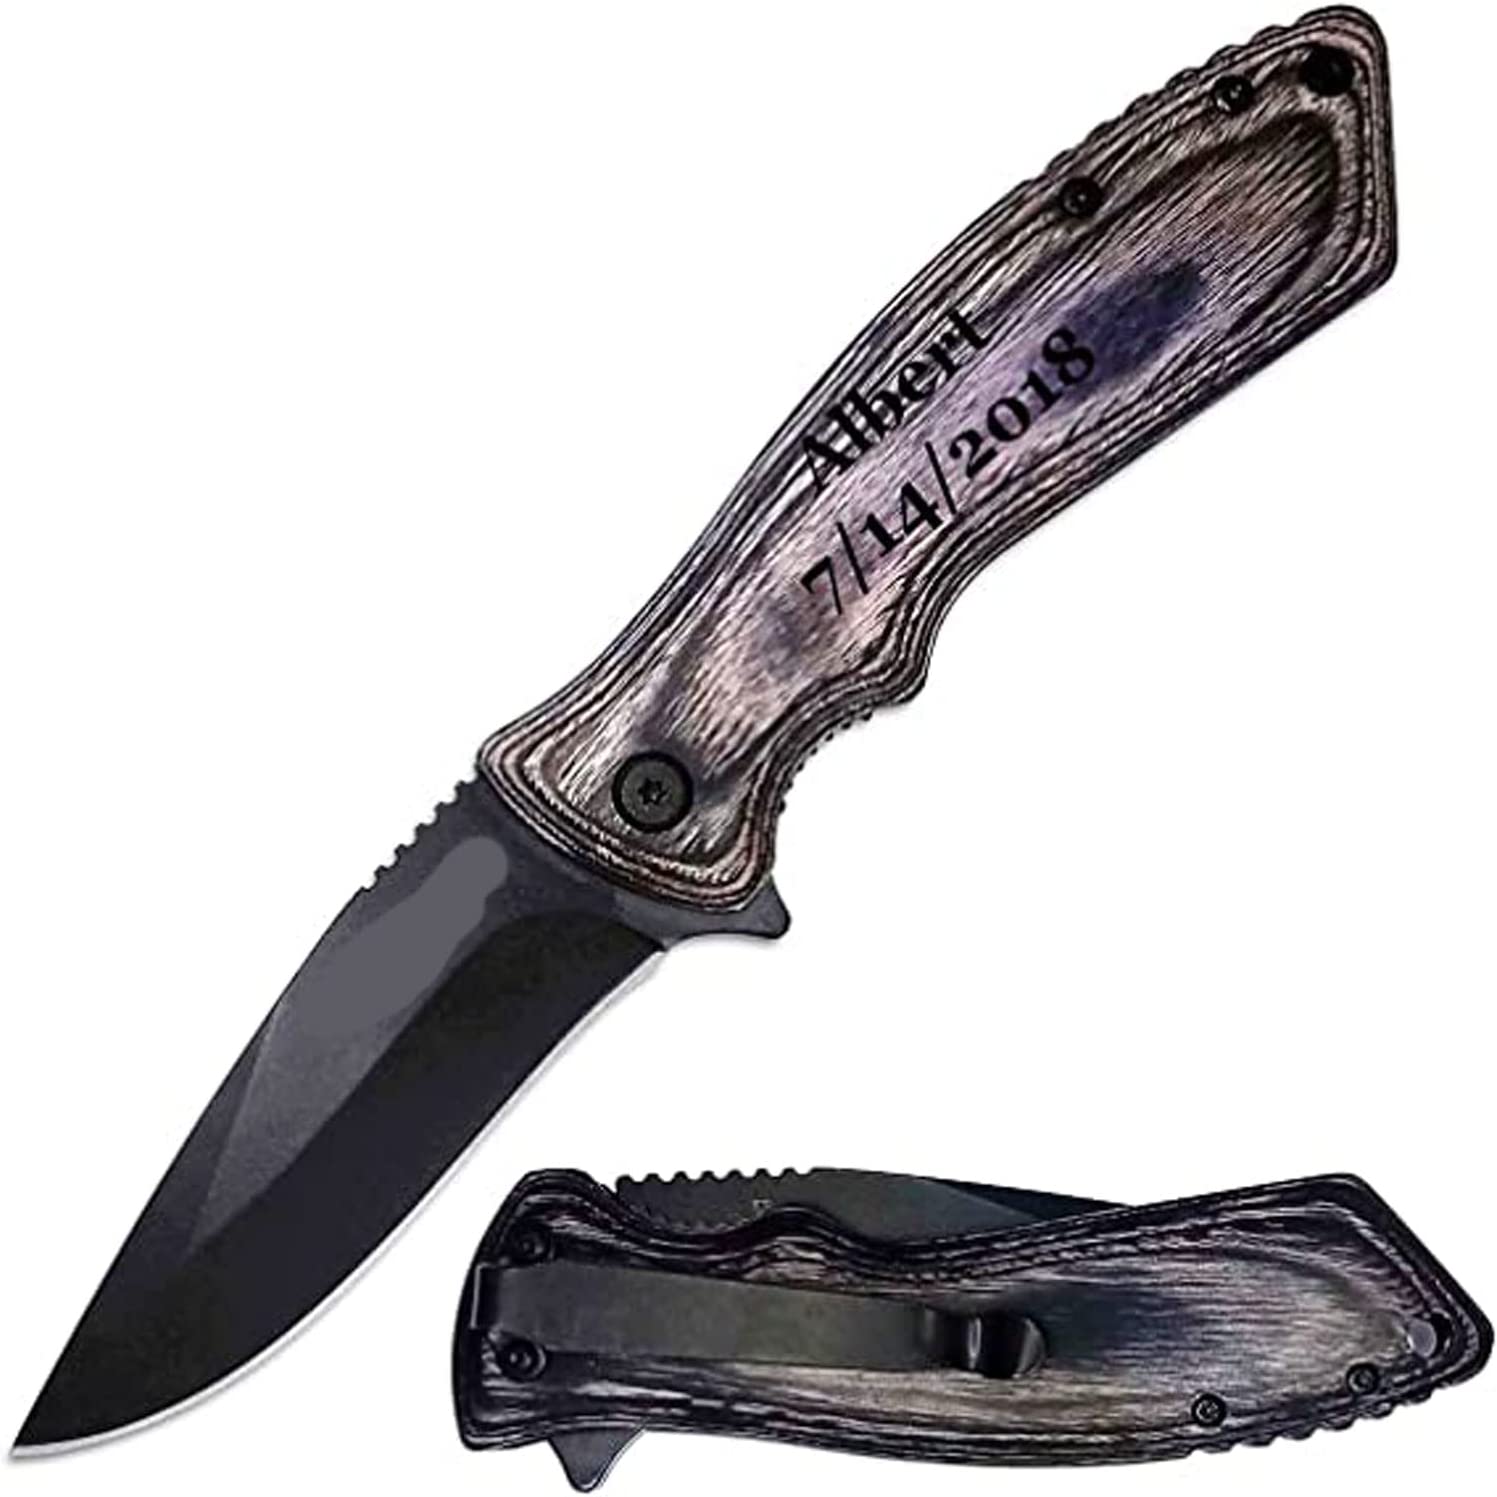 Elk Ridge - Personalized Quality Pocket Knife with Free Engraving - ER-002GY, Pack 1